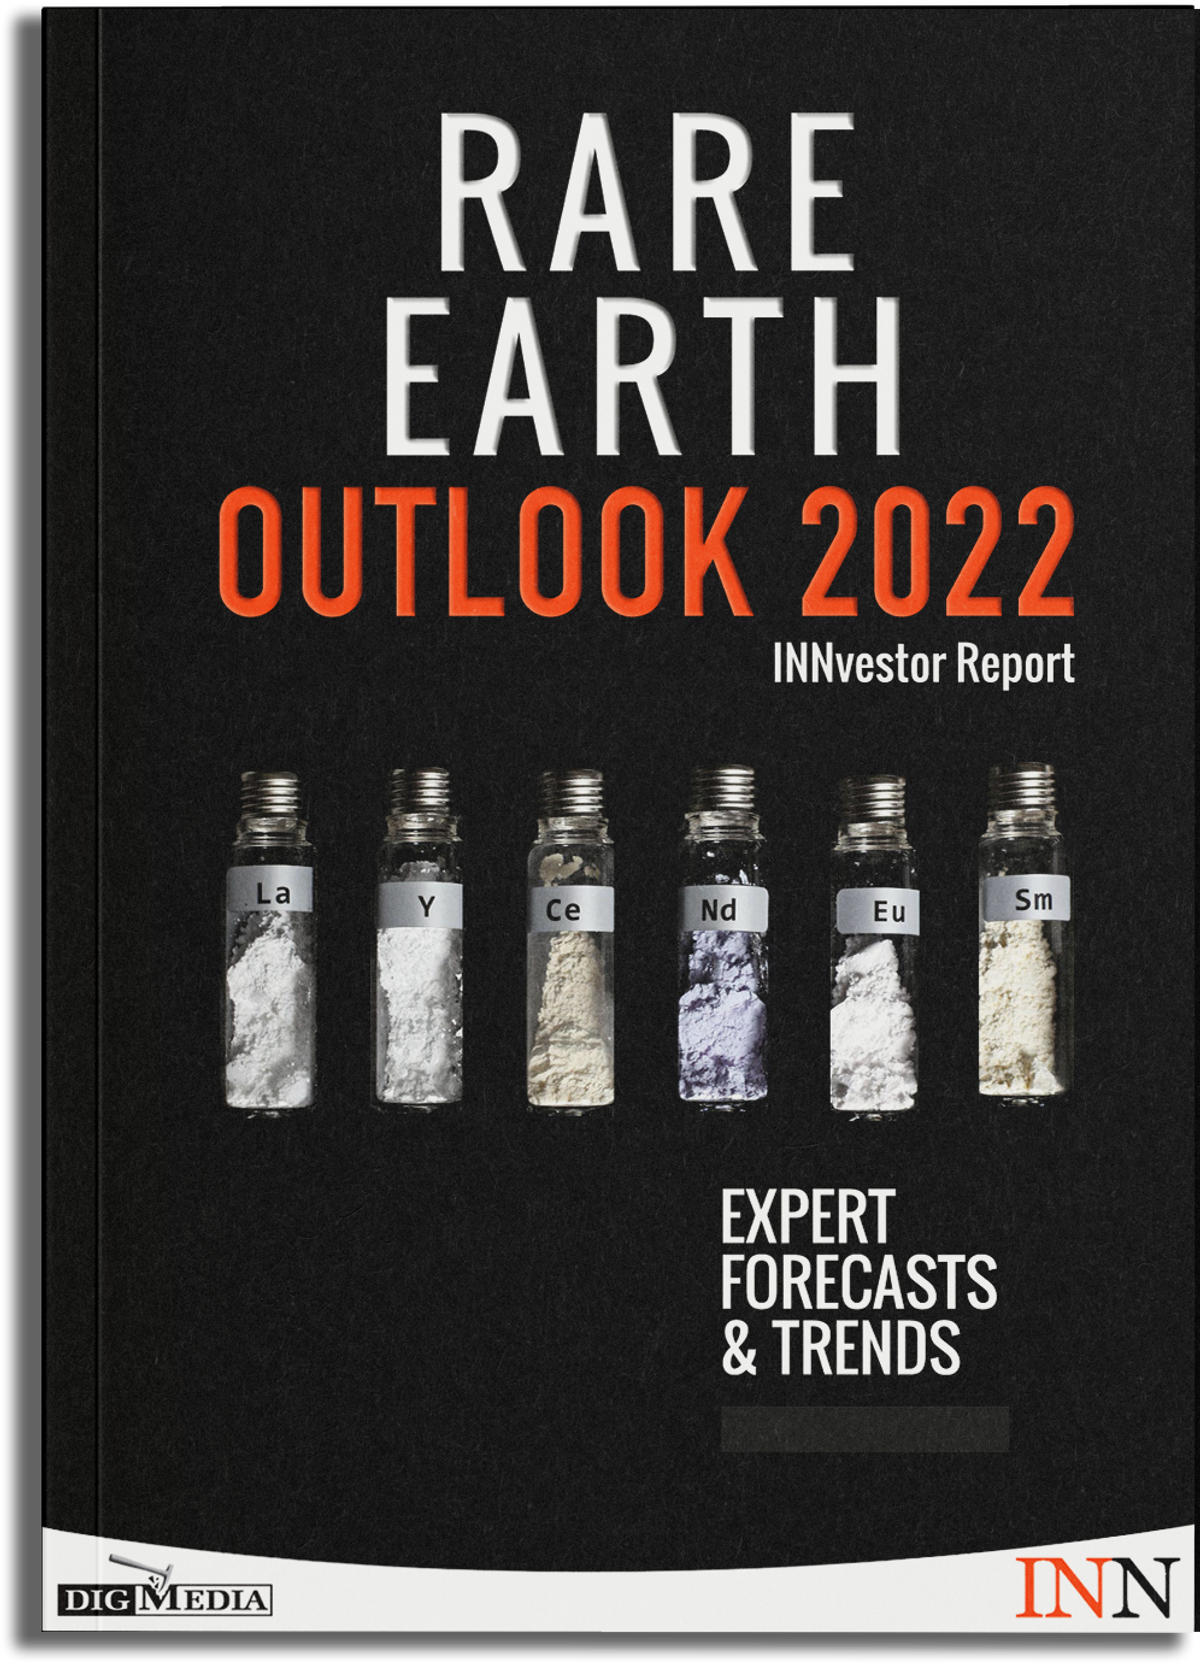 Rare Earth Outlook Report 2022